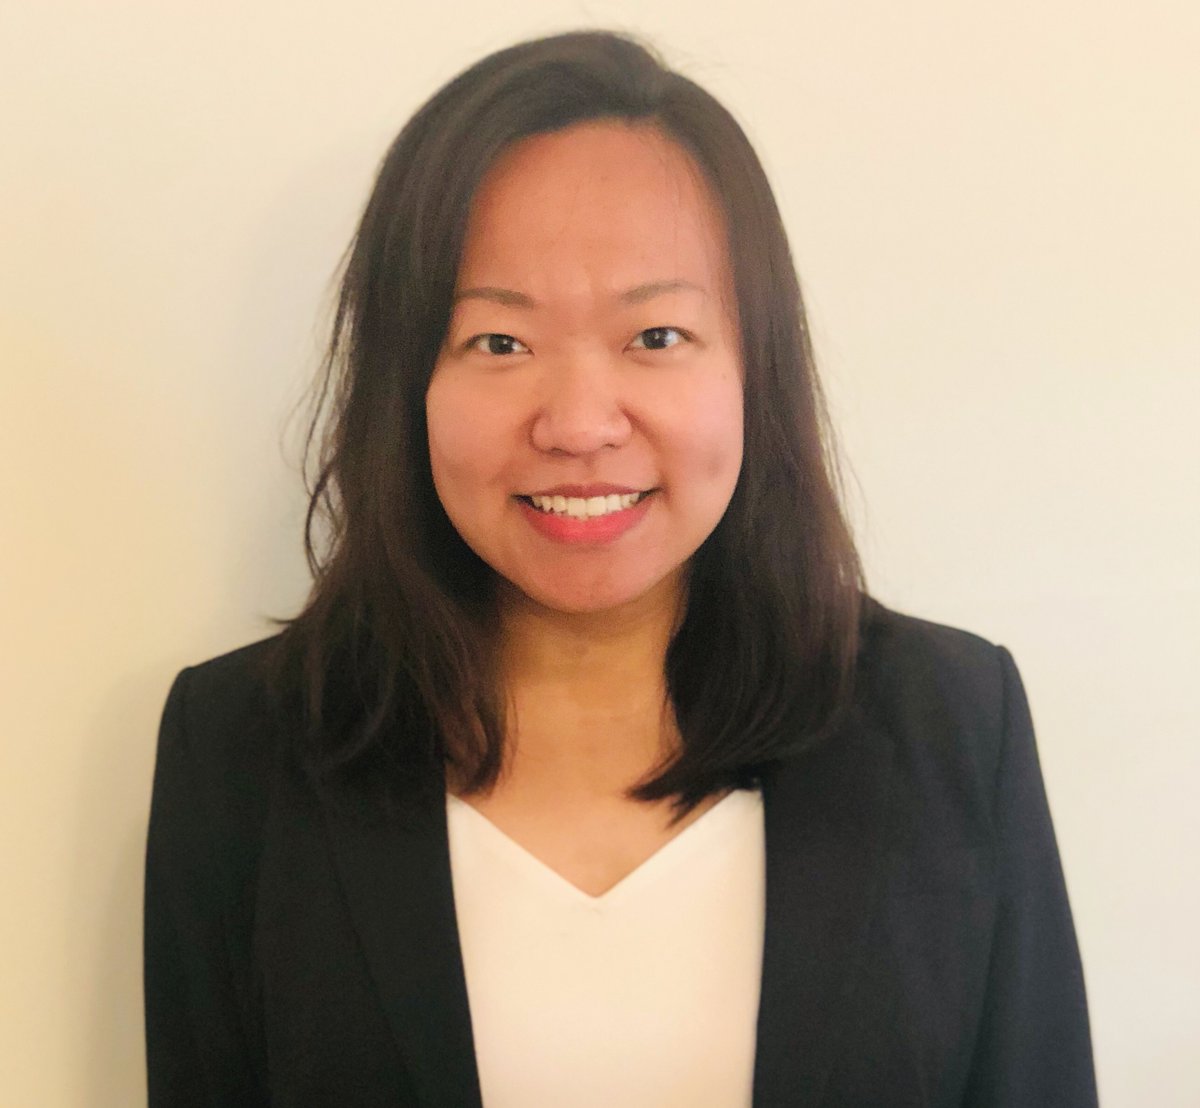 Dr. Borui Zhang recently joined the Libraries as our Natural Language Processing Specialist. In this librarian role, she will lead our AI for everyone commitment & work with partners on related instruction, consultation, & projects. go.ufl.edu/arcsai #AIatUF #GatorDay